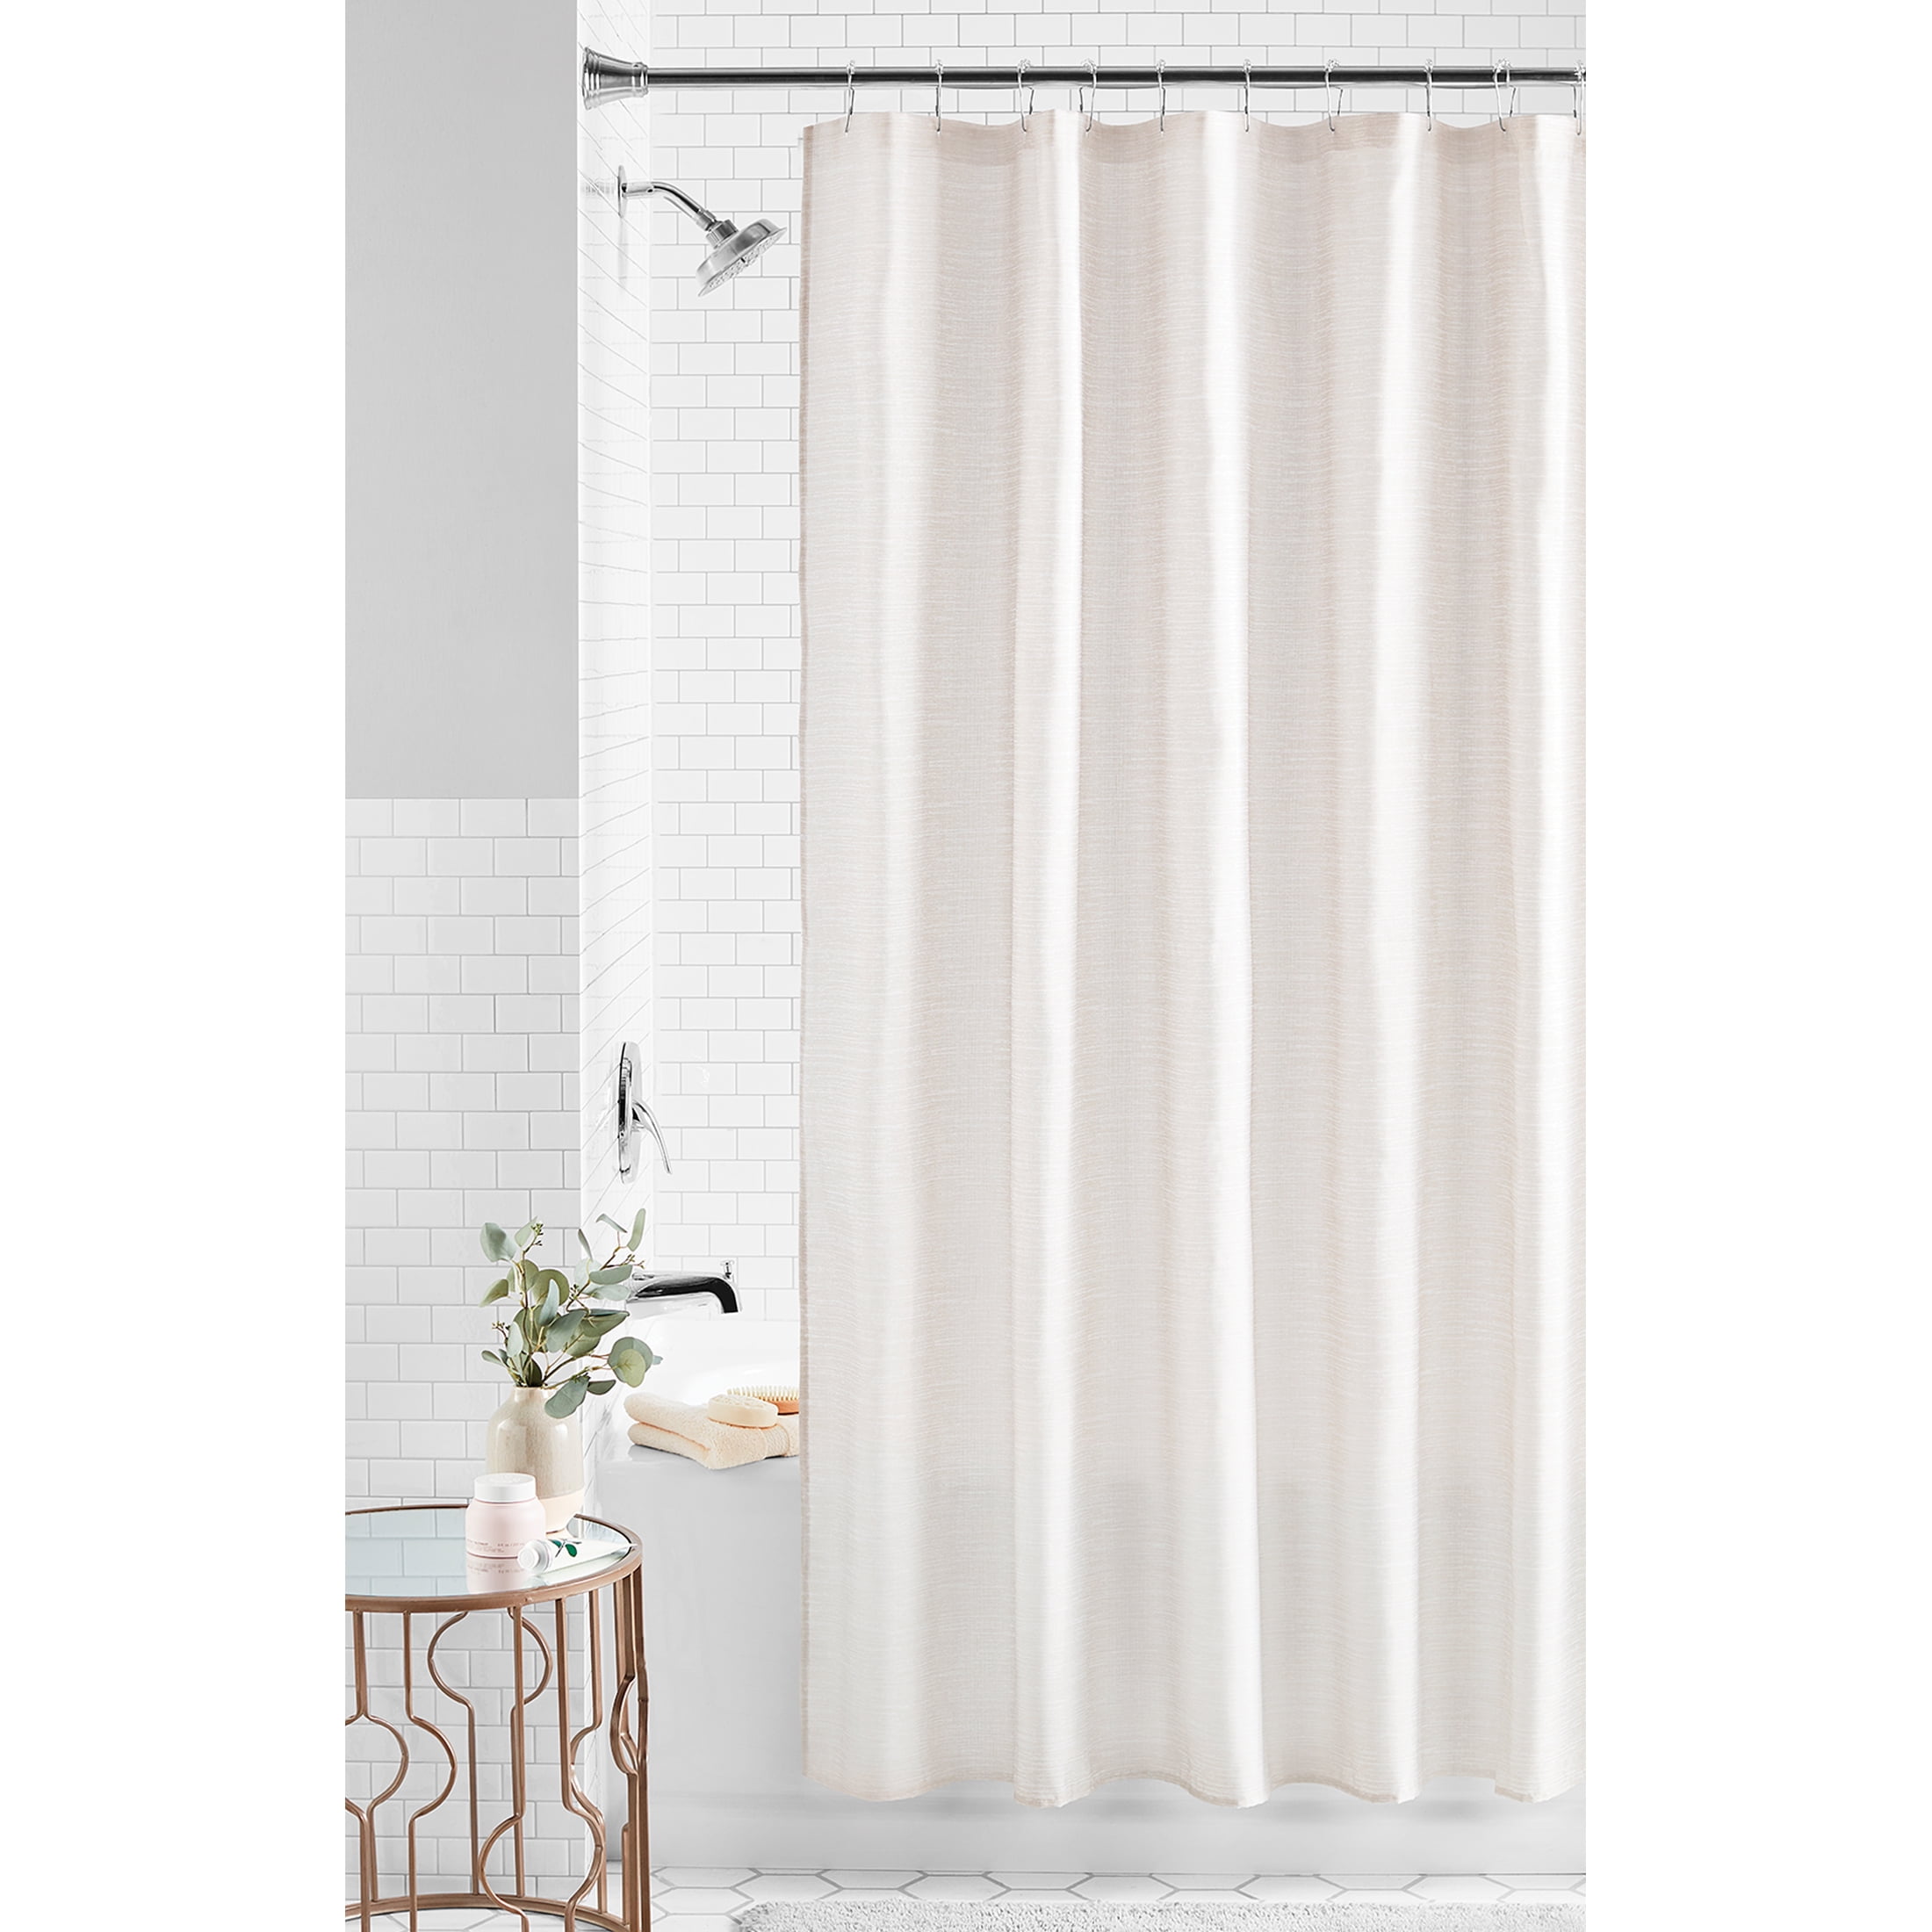 Mainstays Tan Texture Polyester Fabric Shower Curtain, 72" x 72"